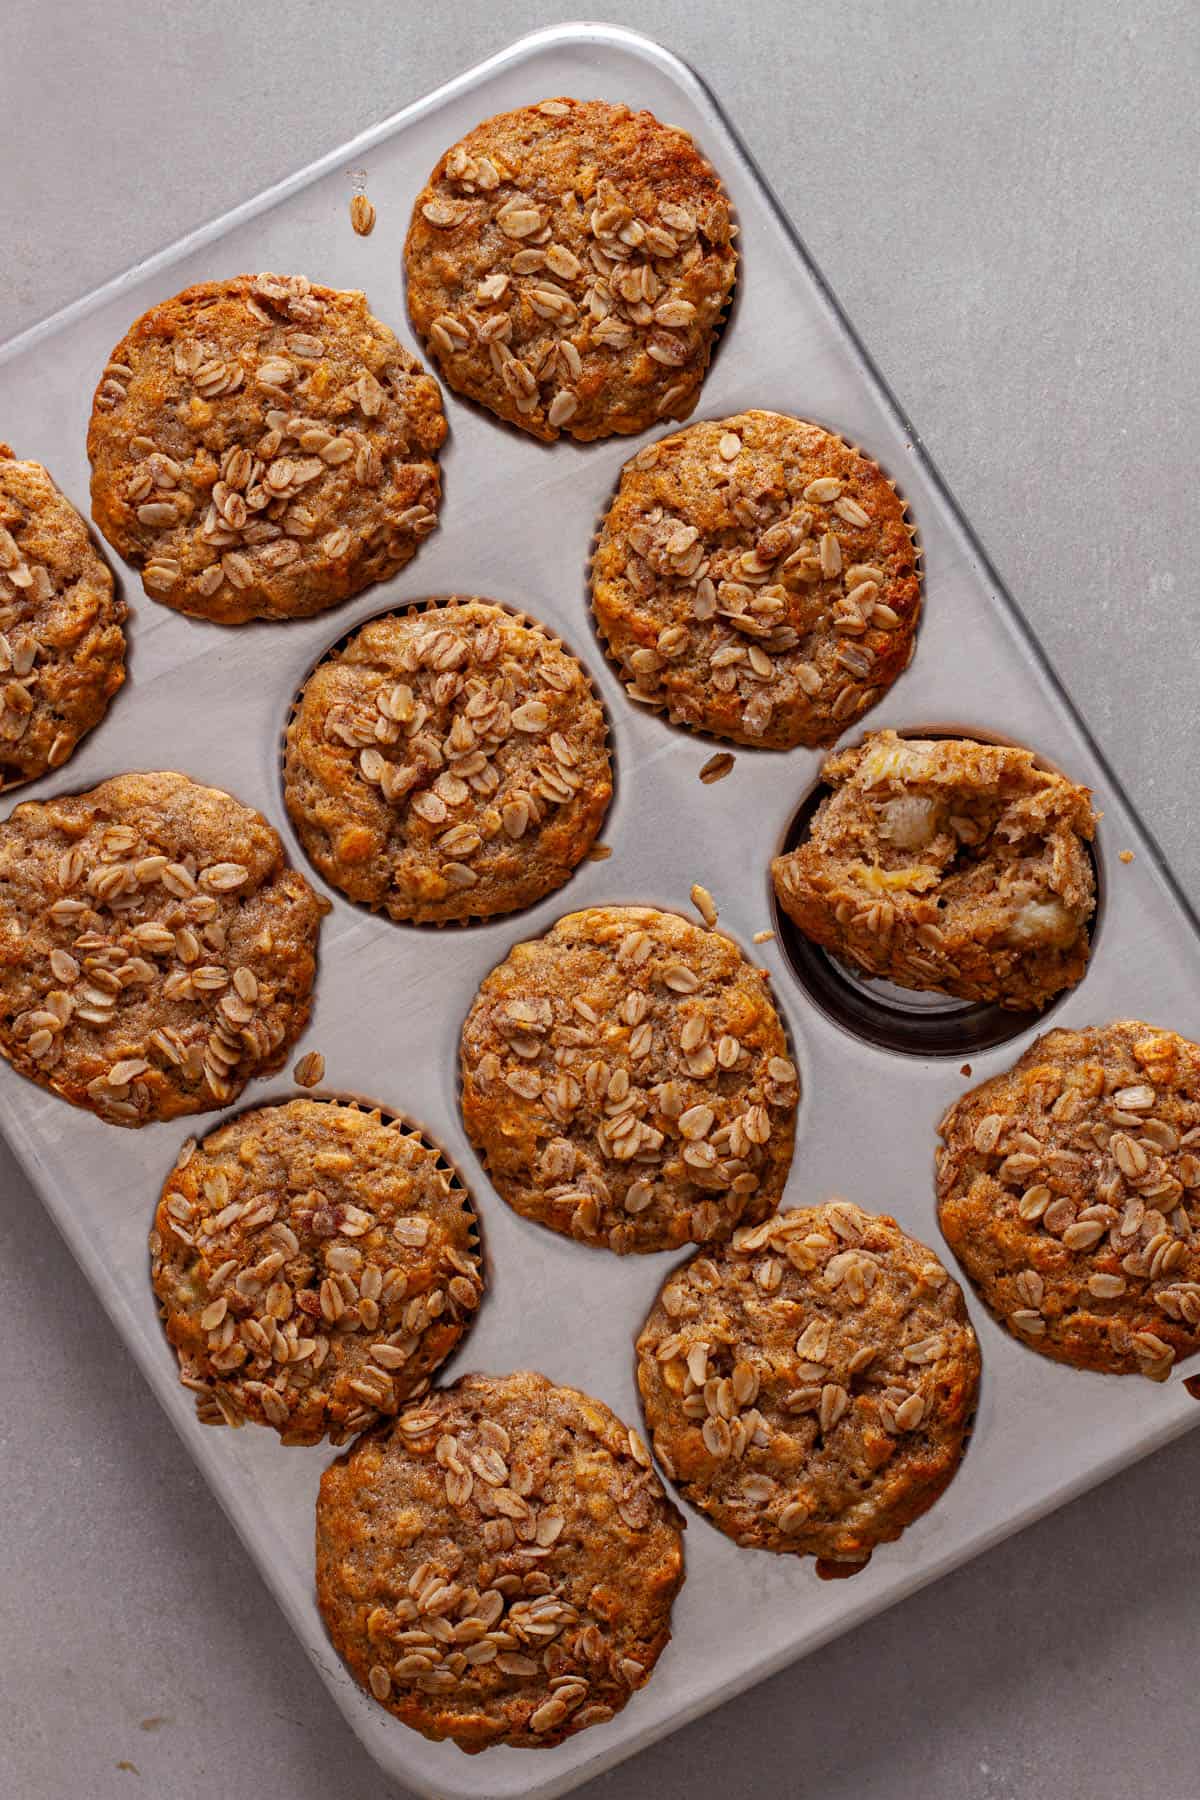 A muffin tin of banana oat muffins with one on its side with a bite taken out.